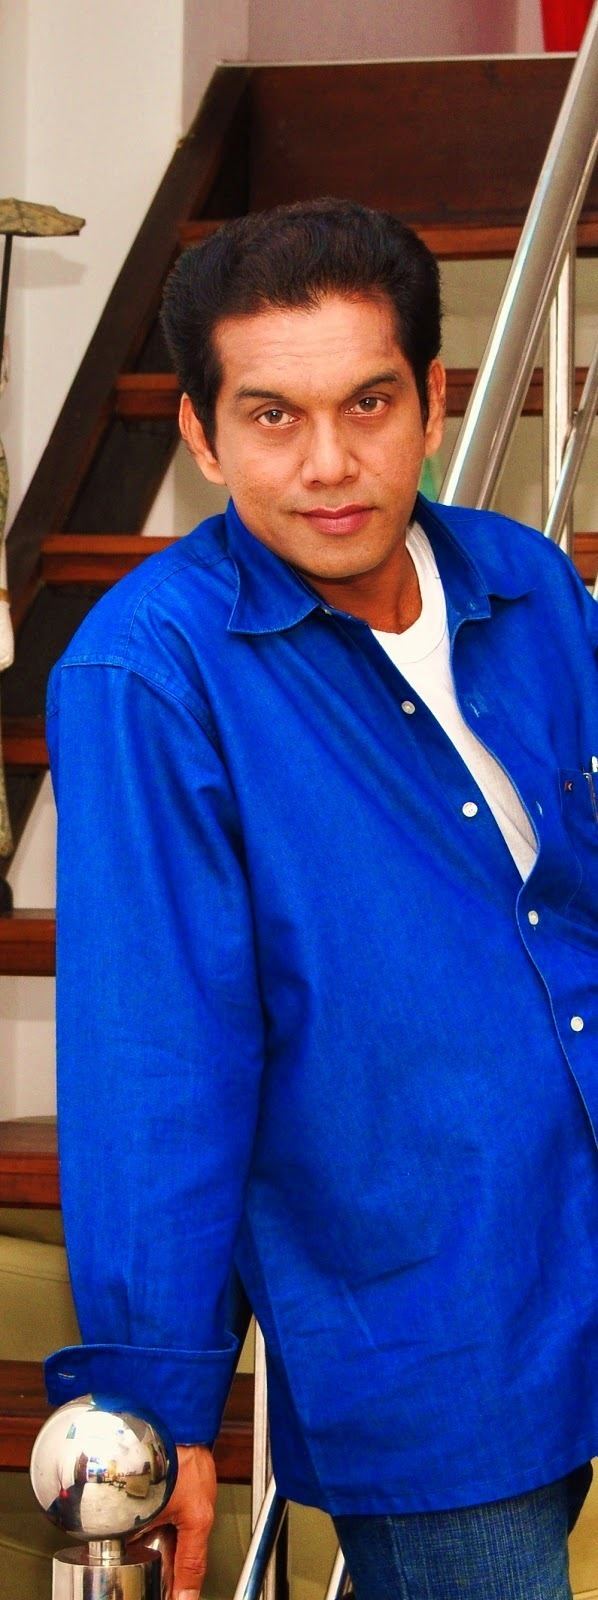 Kamal Addararachchi smiling while wearing blue long sleeves and jeans